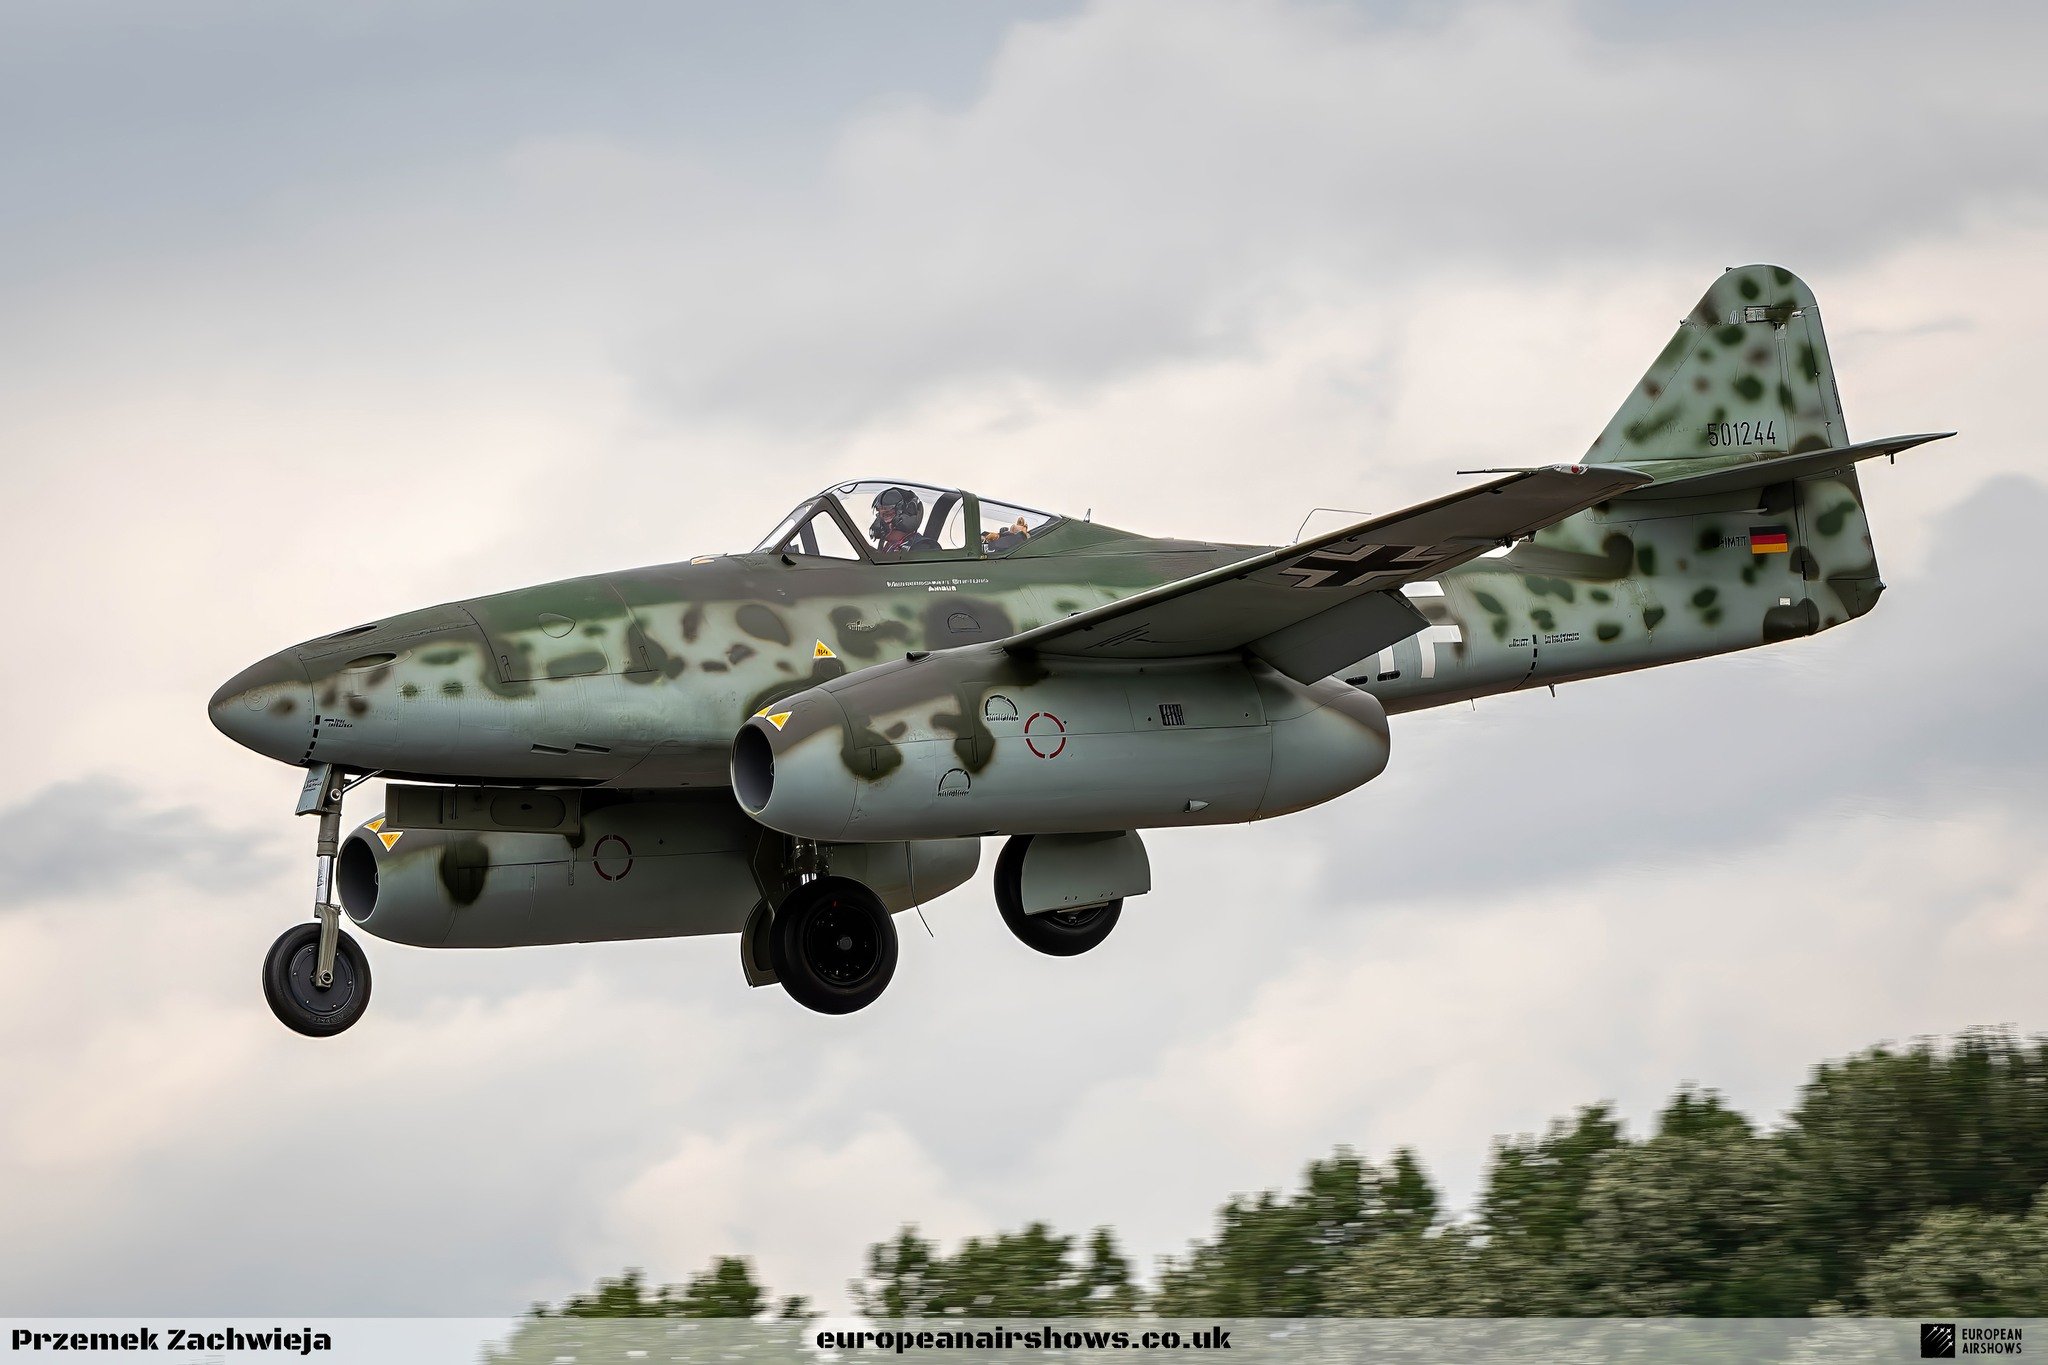 𝐀𝐈𝐑𝐒𝐇𝐎𝐖 𝐍𝐄𝐖𝐒: Aviation enthusiasts, brace yourselves! The organizers of the Aviatick&aacute; pouť have released an exciting update regarding the flying display.

In addition to the already impressive line-up of aircraft, they have added th